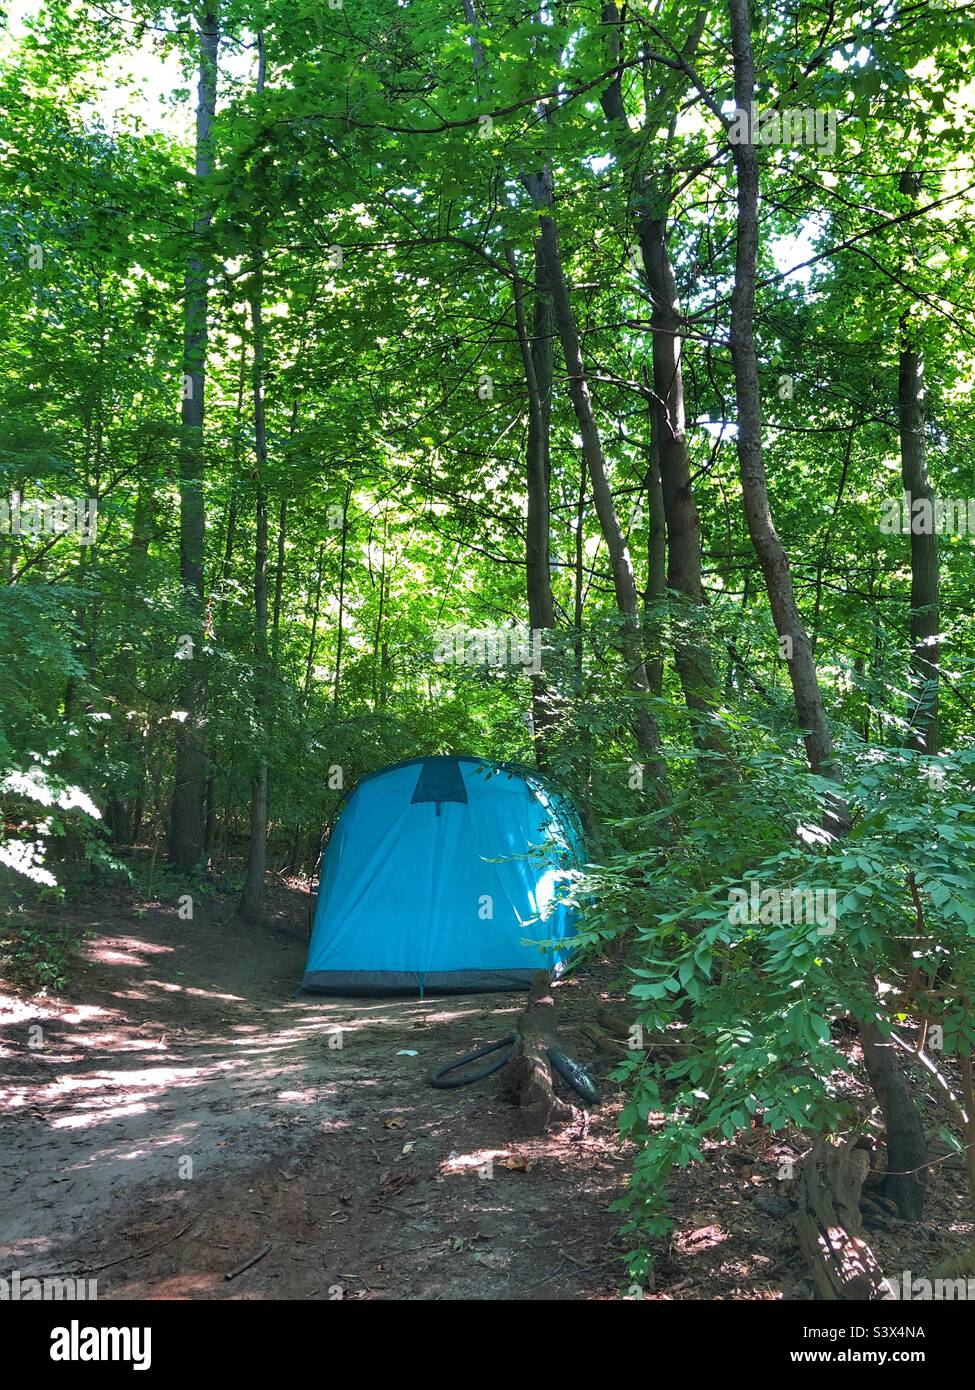 A blue tent in the woods. Stock Photo